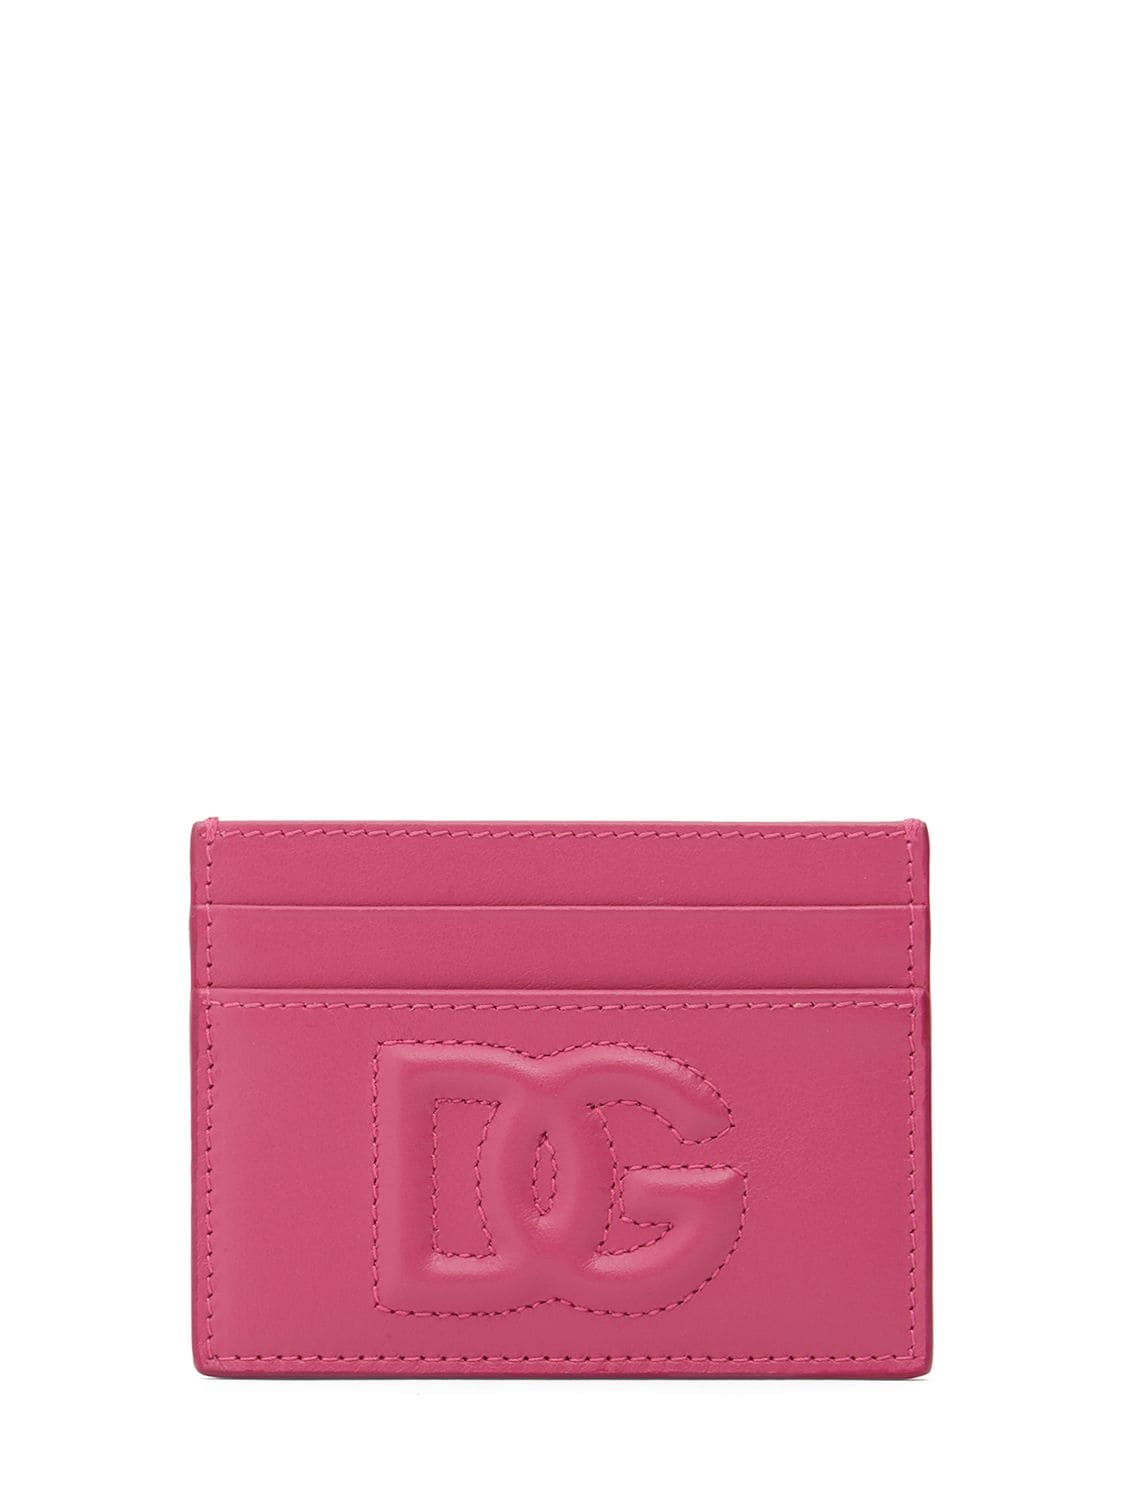 Dolce & Gabbana Embossed Logo Leather Card Holder In Light Lilac